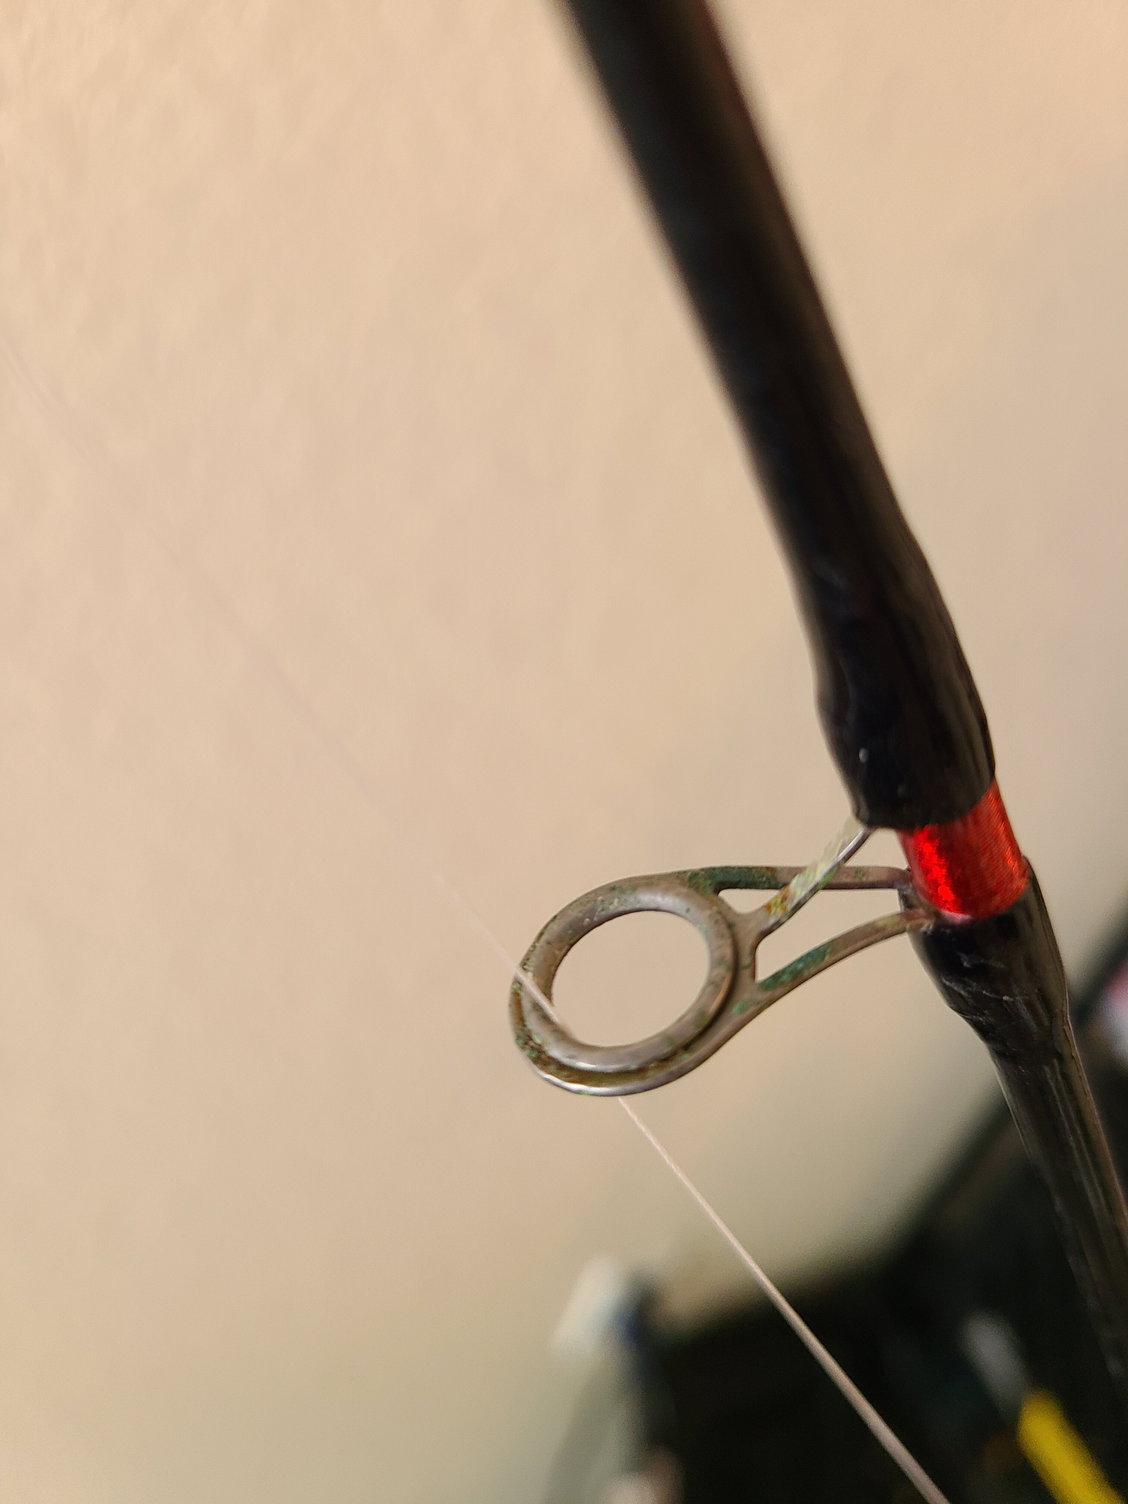 How to fix fishing rod guides/eyes  rust and green corrosion